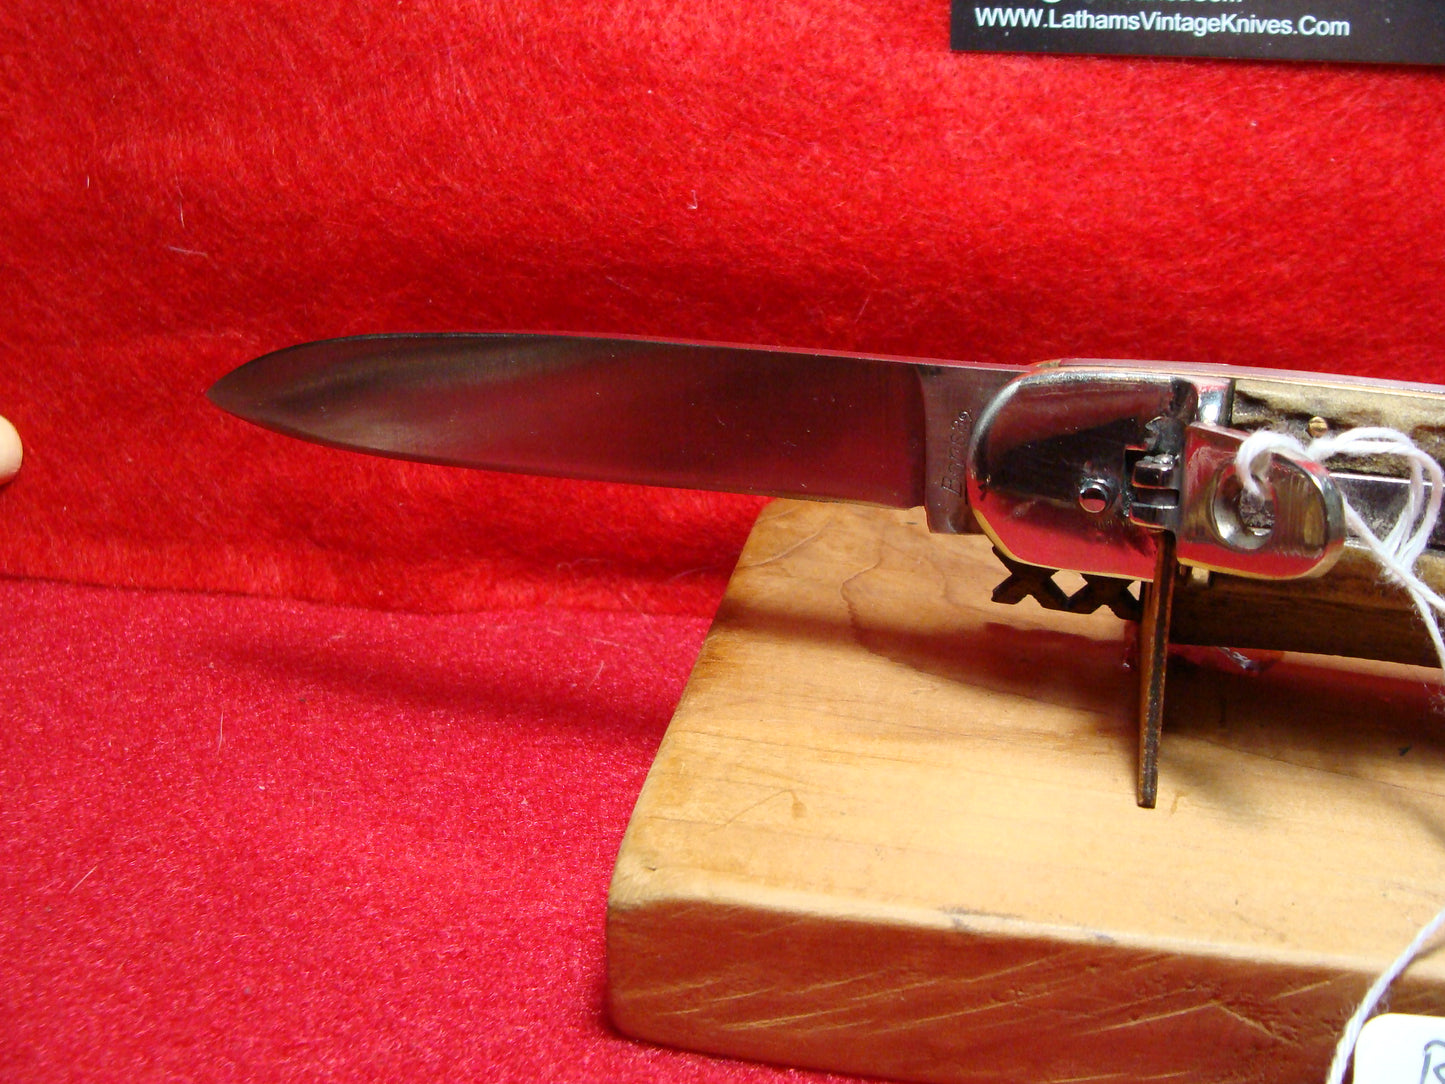 BONSA SOLINGEN GERMANY 1955-65 LEVER AUTOMATIC SPRINGER 11 CM GERMAN AUTOMATIC KNIFE STAG HANDLES